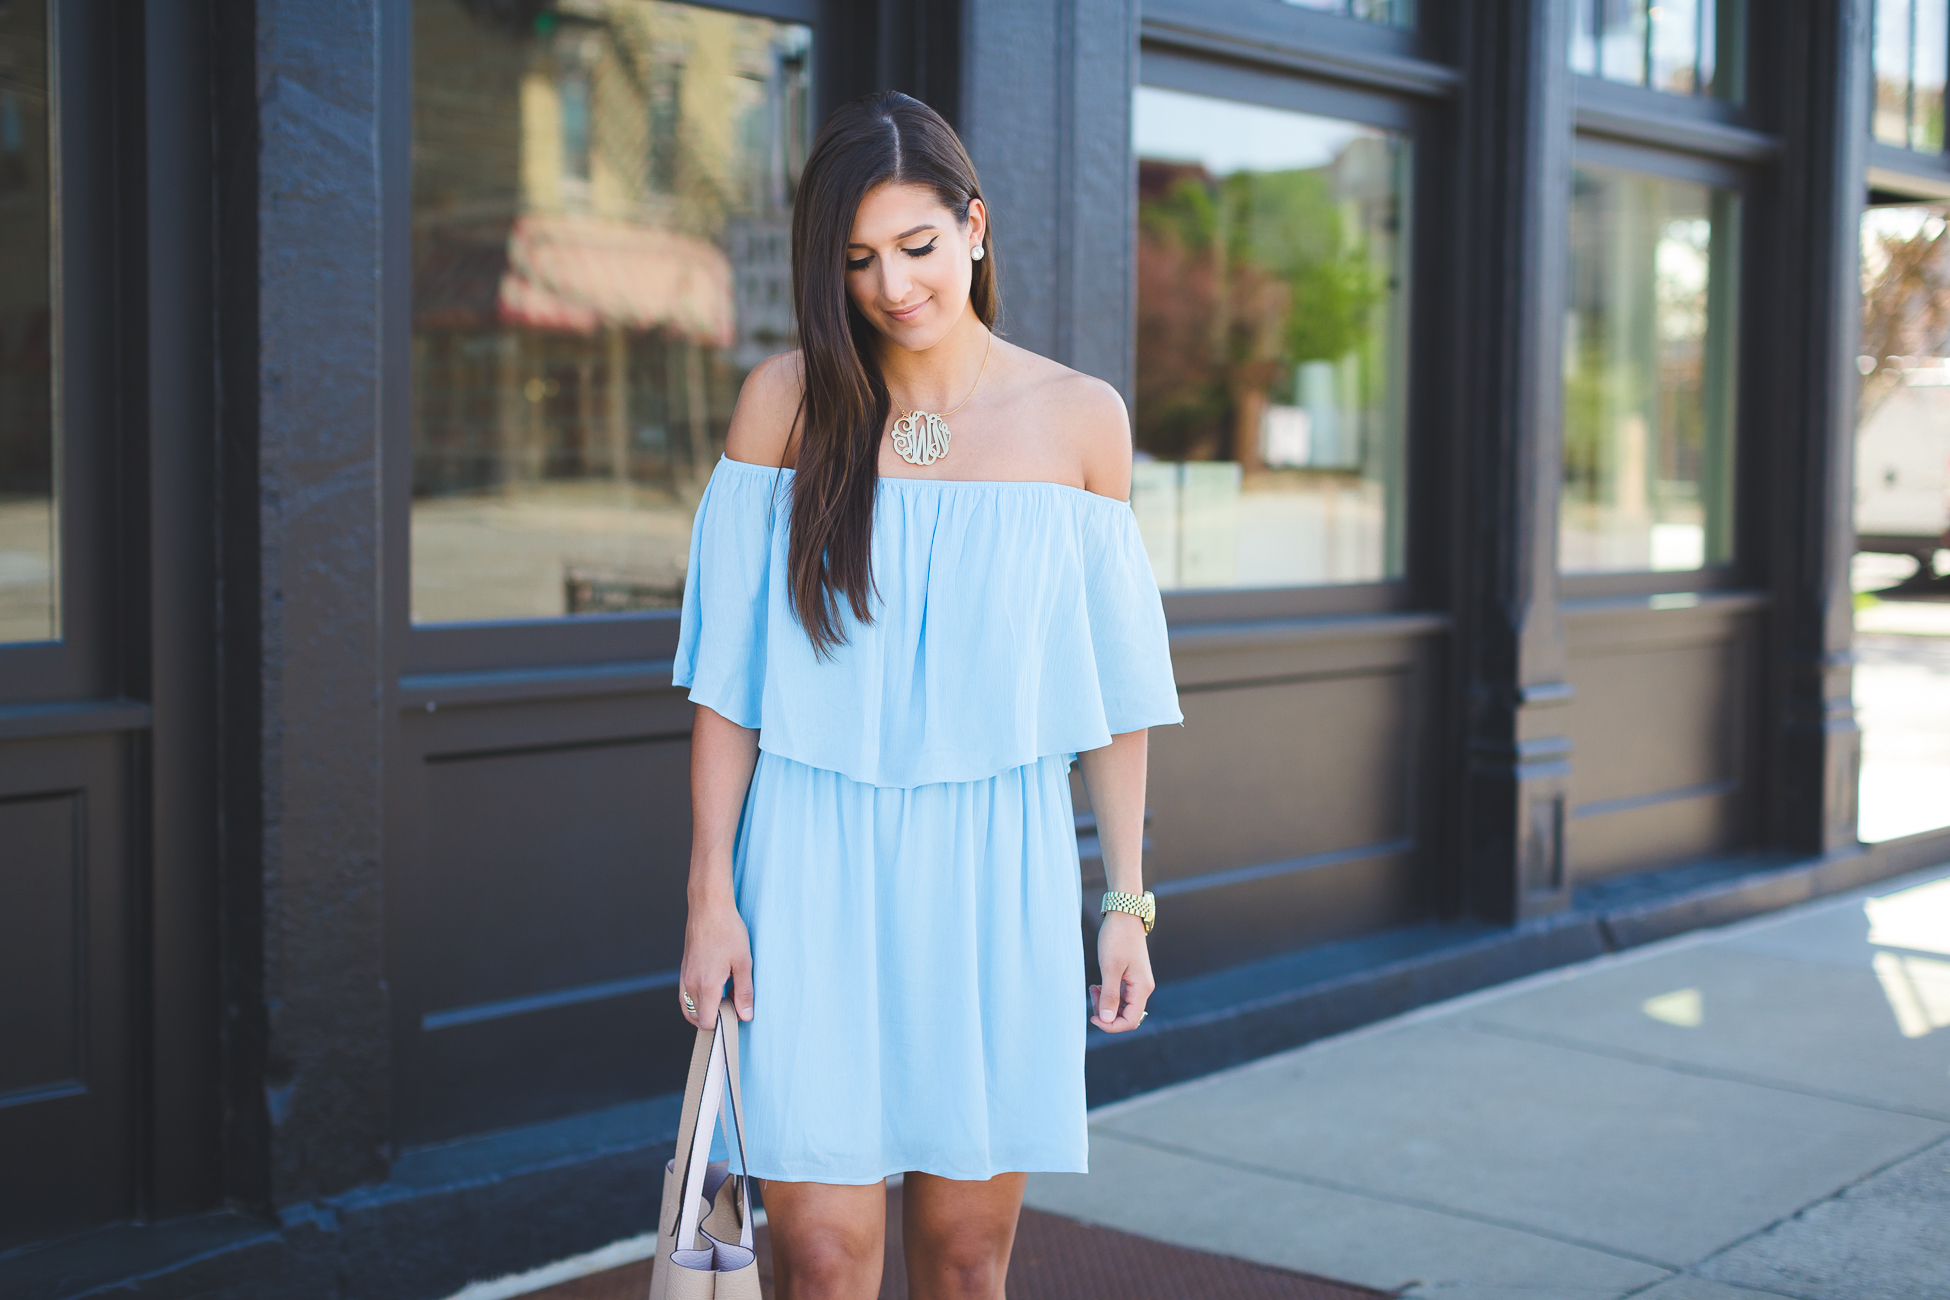 blue off the shoulder dress, feminine off the shoulder dress, spring dress spring fashion, spring style, spring outfit ideas, spring outfits, nordstrom dress, nordstrom outfit, nordstrom off the shoulder dress, everly dress, vince camuto ceara sandal, gold monogram necklace // grace wainwright from a southern drawl